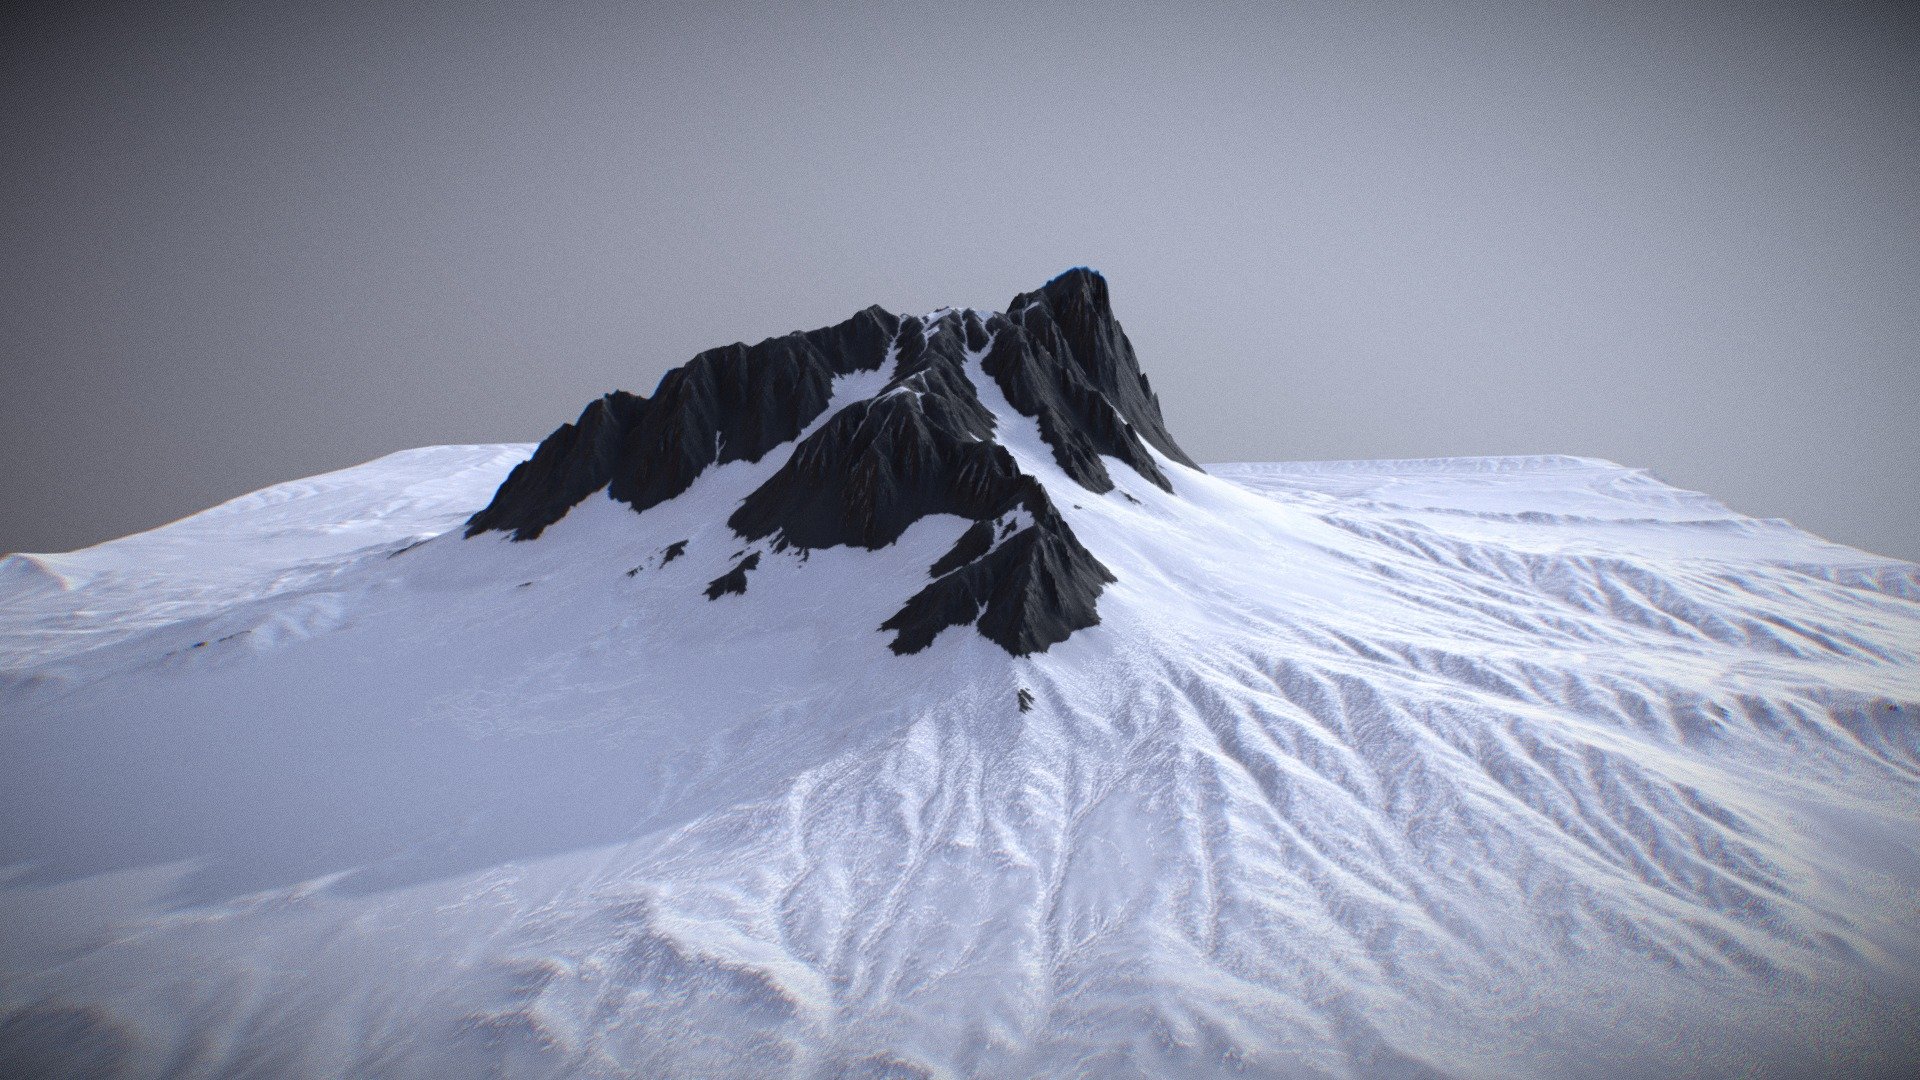 This mountain is a high end, photorealistic 3D model, that is created to help you add the realism to your project.

The model is suitable for any visual production - broadcast, high-res film close-ups, advertising, games, design visualization, forensic presentation, animated movie production, still illustration etc.

Model has clean optimized topology 3d model